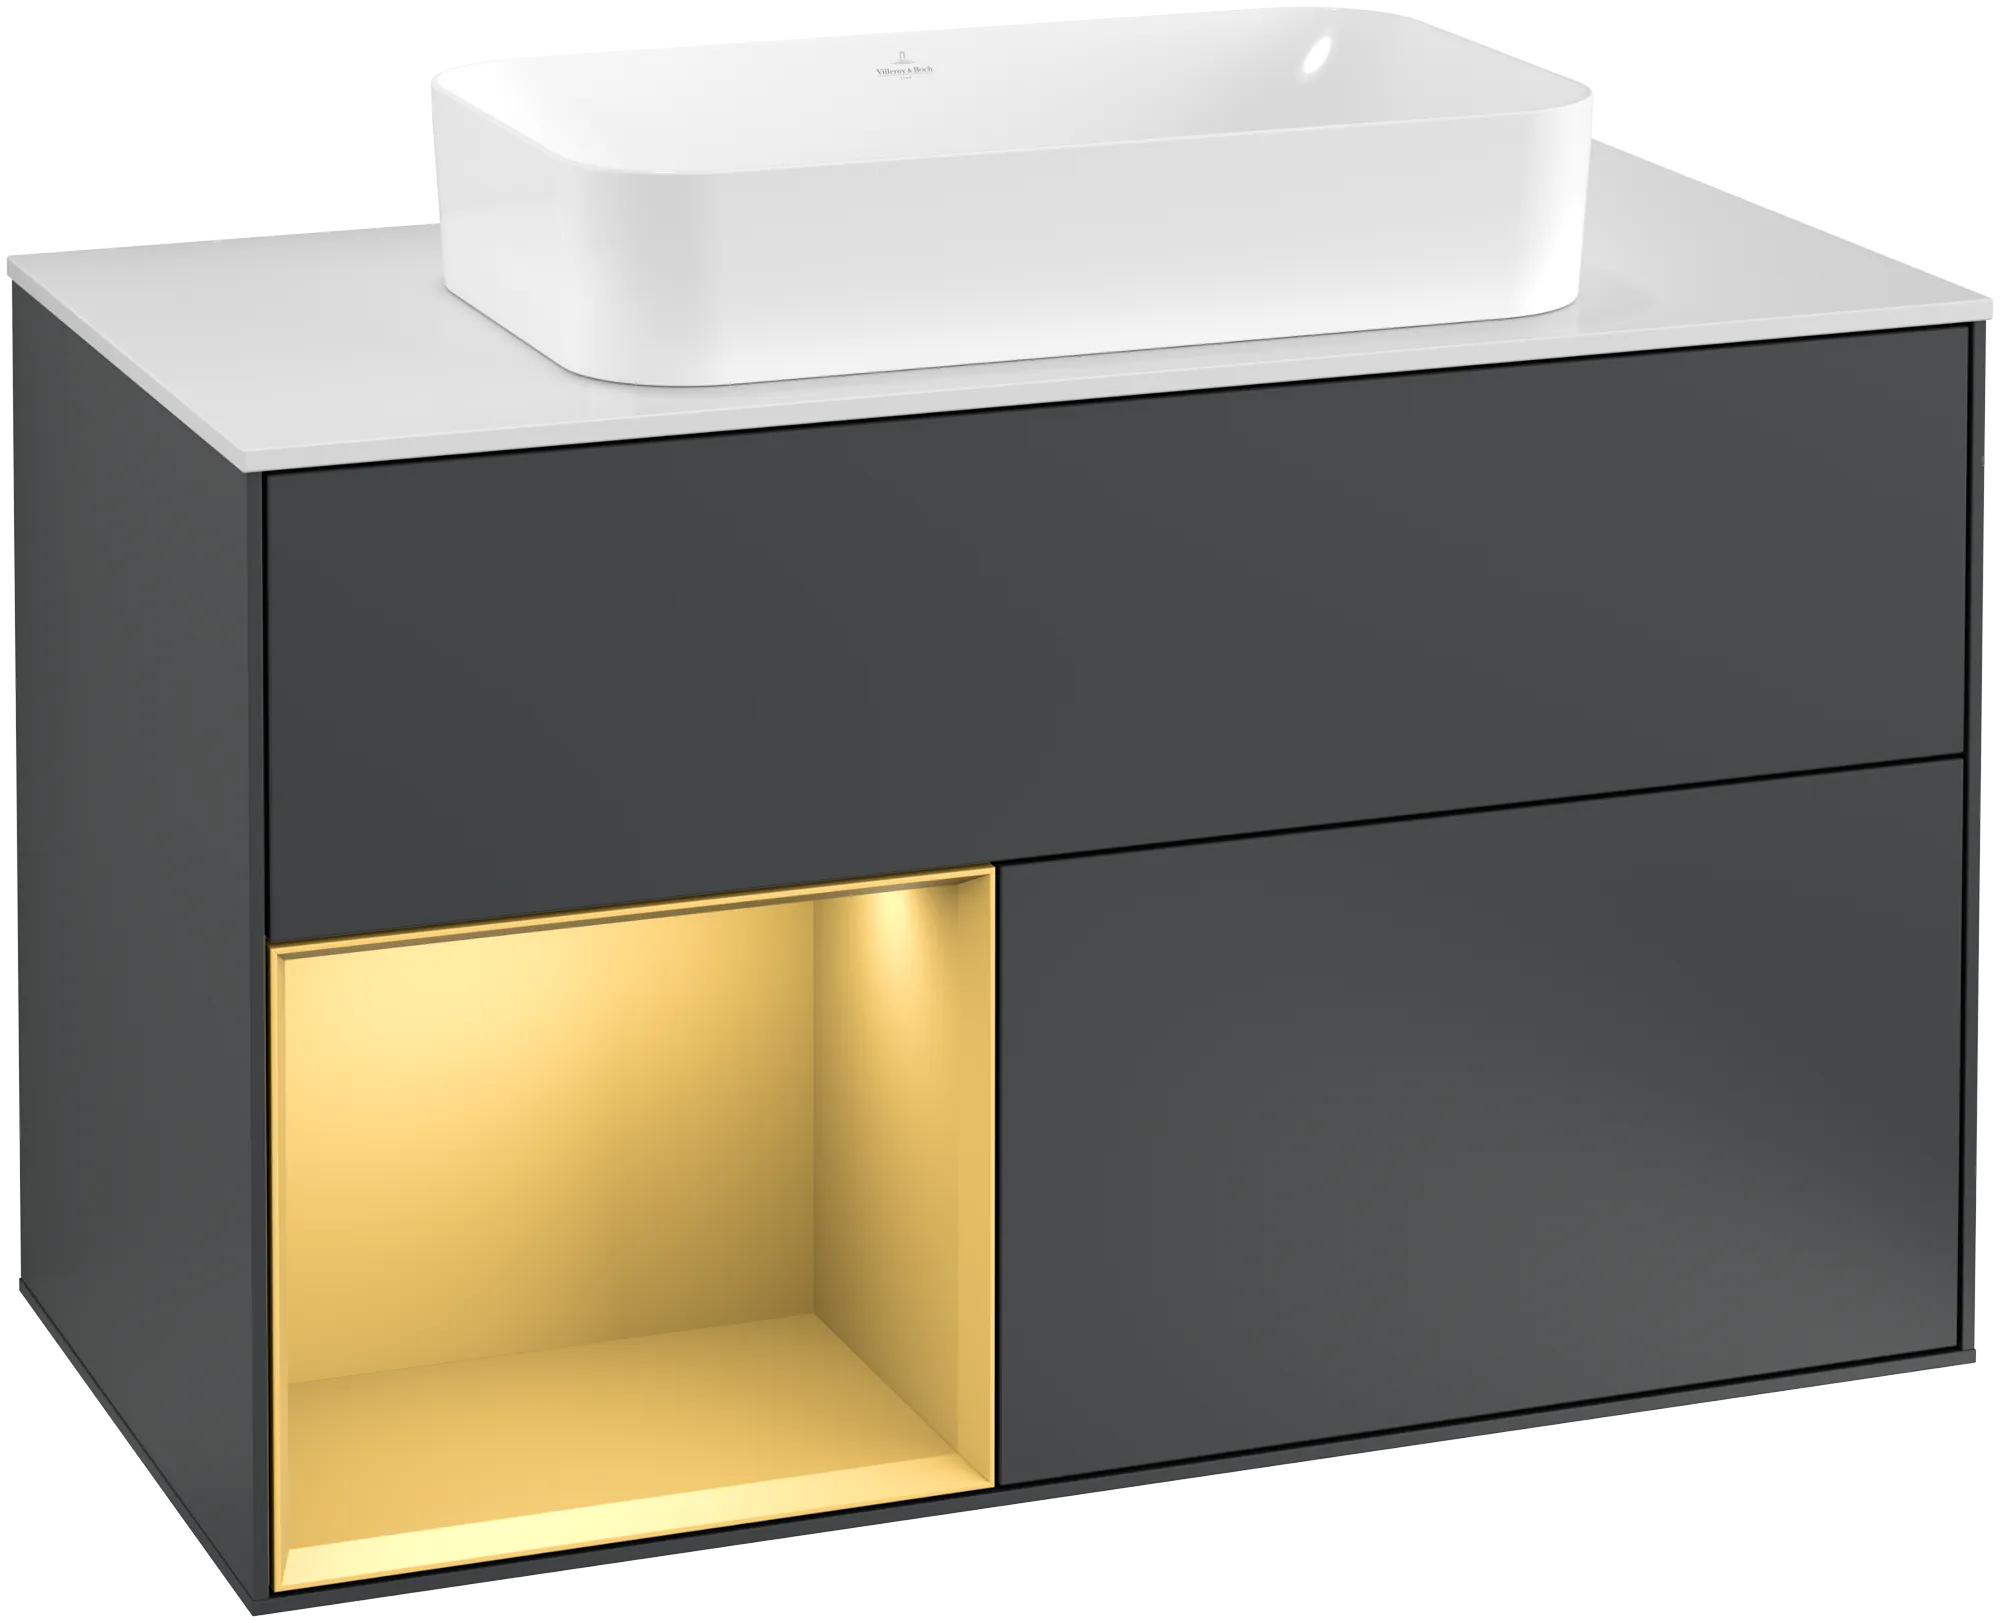 Picture of VILLEROY BOCH Finion Vanity unit, with lighting, 2 pull-out compartments, 1000 x 603 x 501 mm, Midnight Blue Matt Lacquer / Gold Matt Lacquer / Glass White Matt #G241HFHG